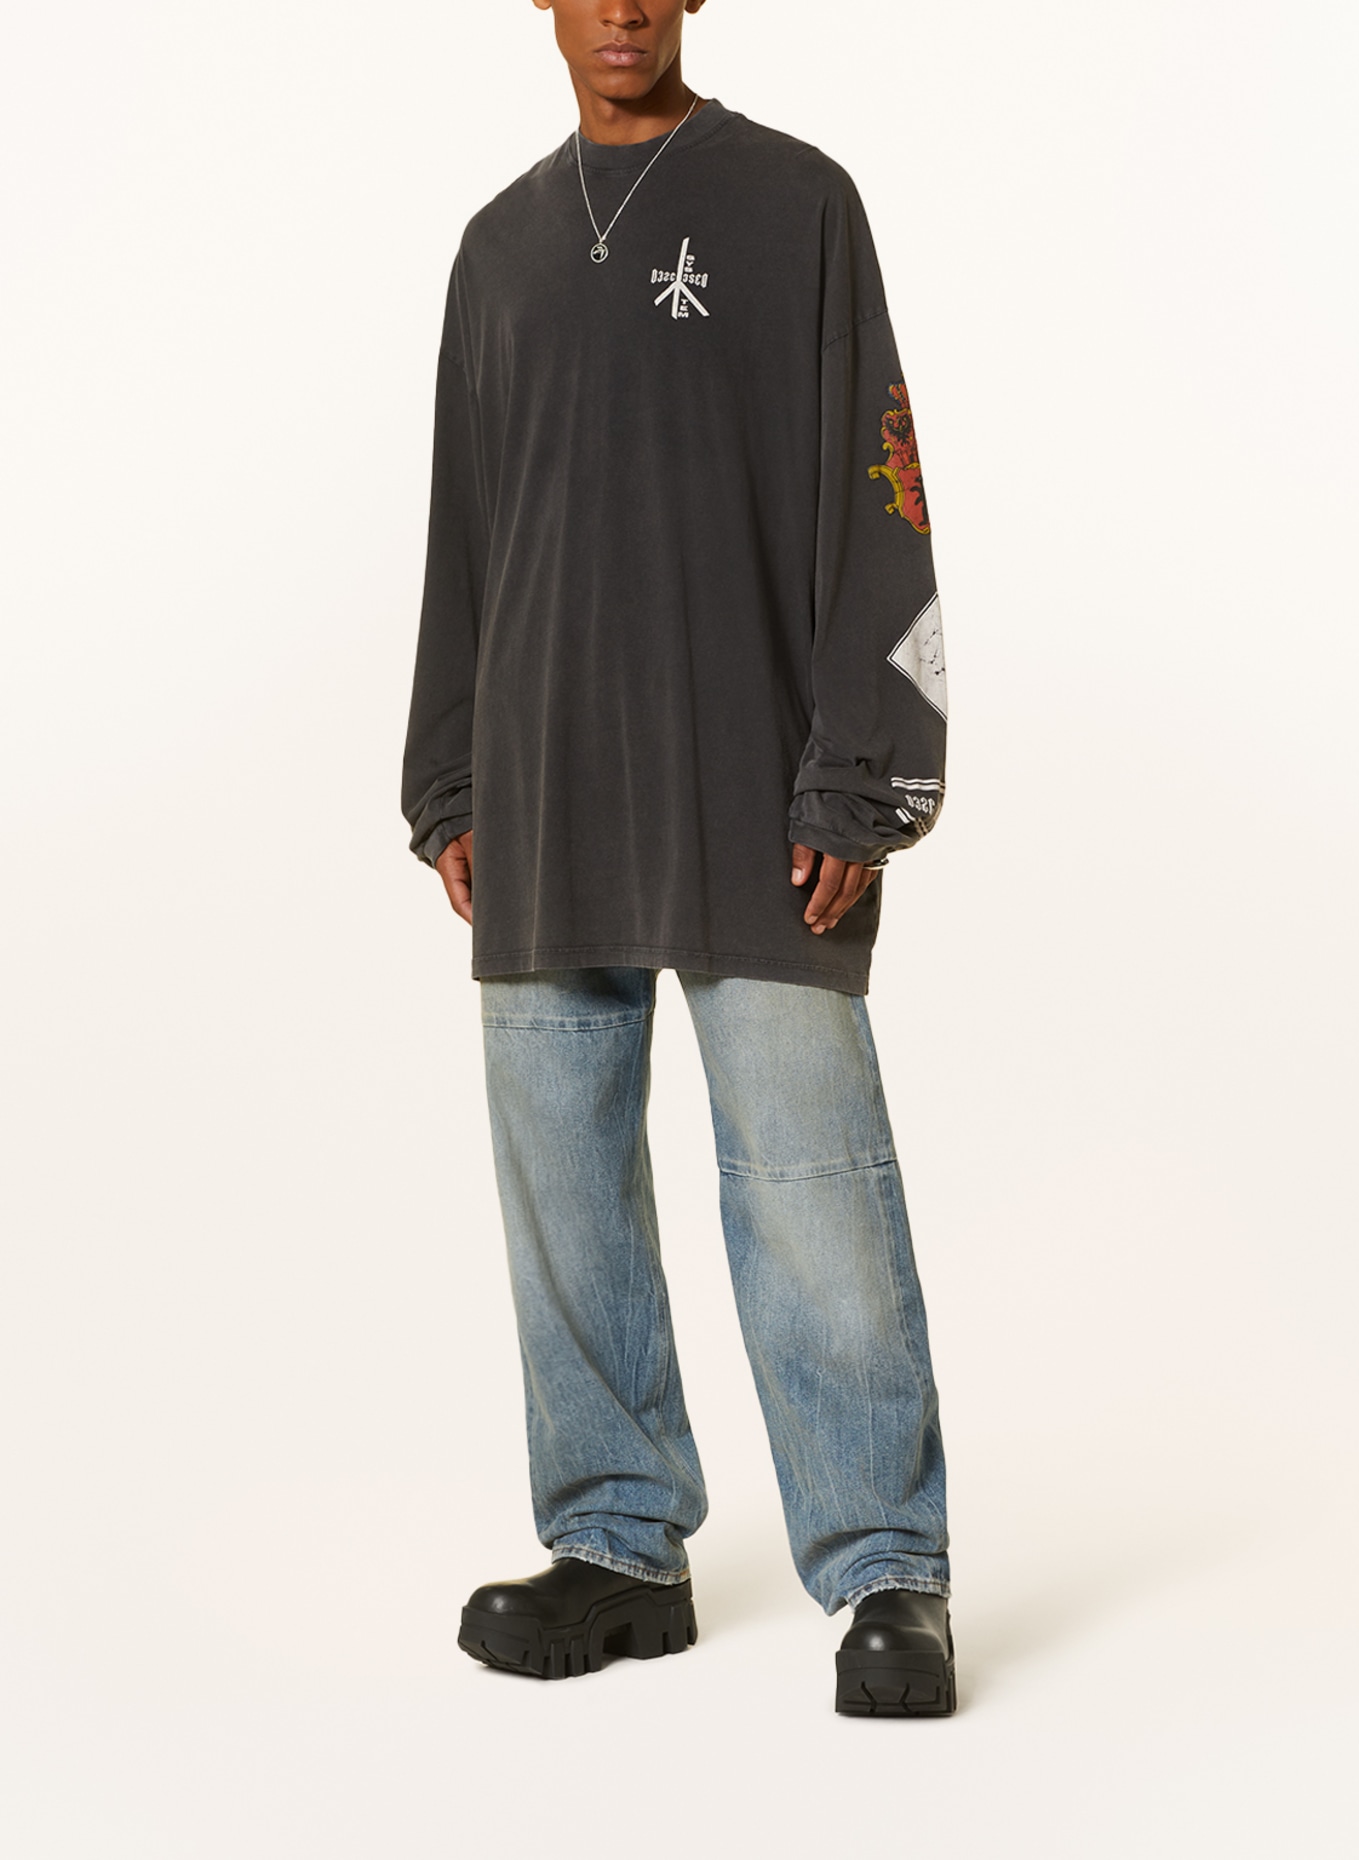 032c Oversized shirt RECOLLECTION, Color: DARK GRAY/ LIGHT GRAY (Image 3)